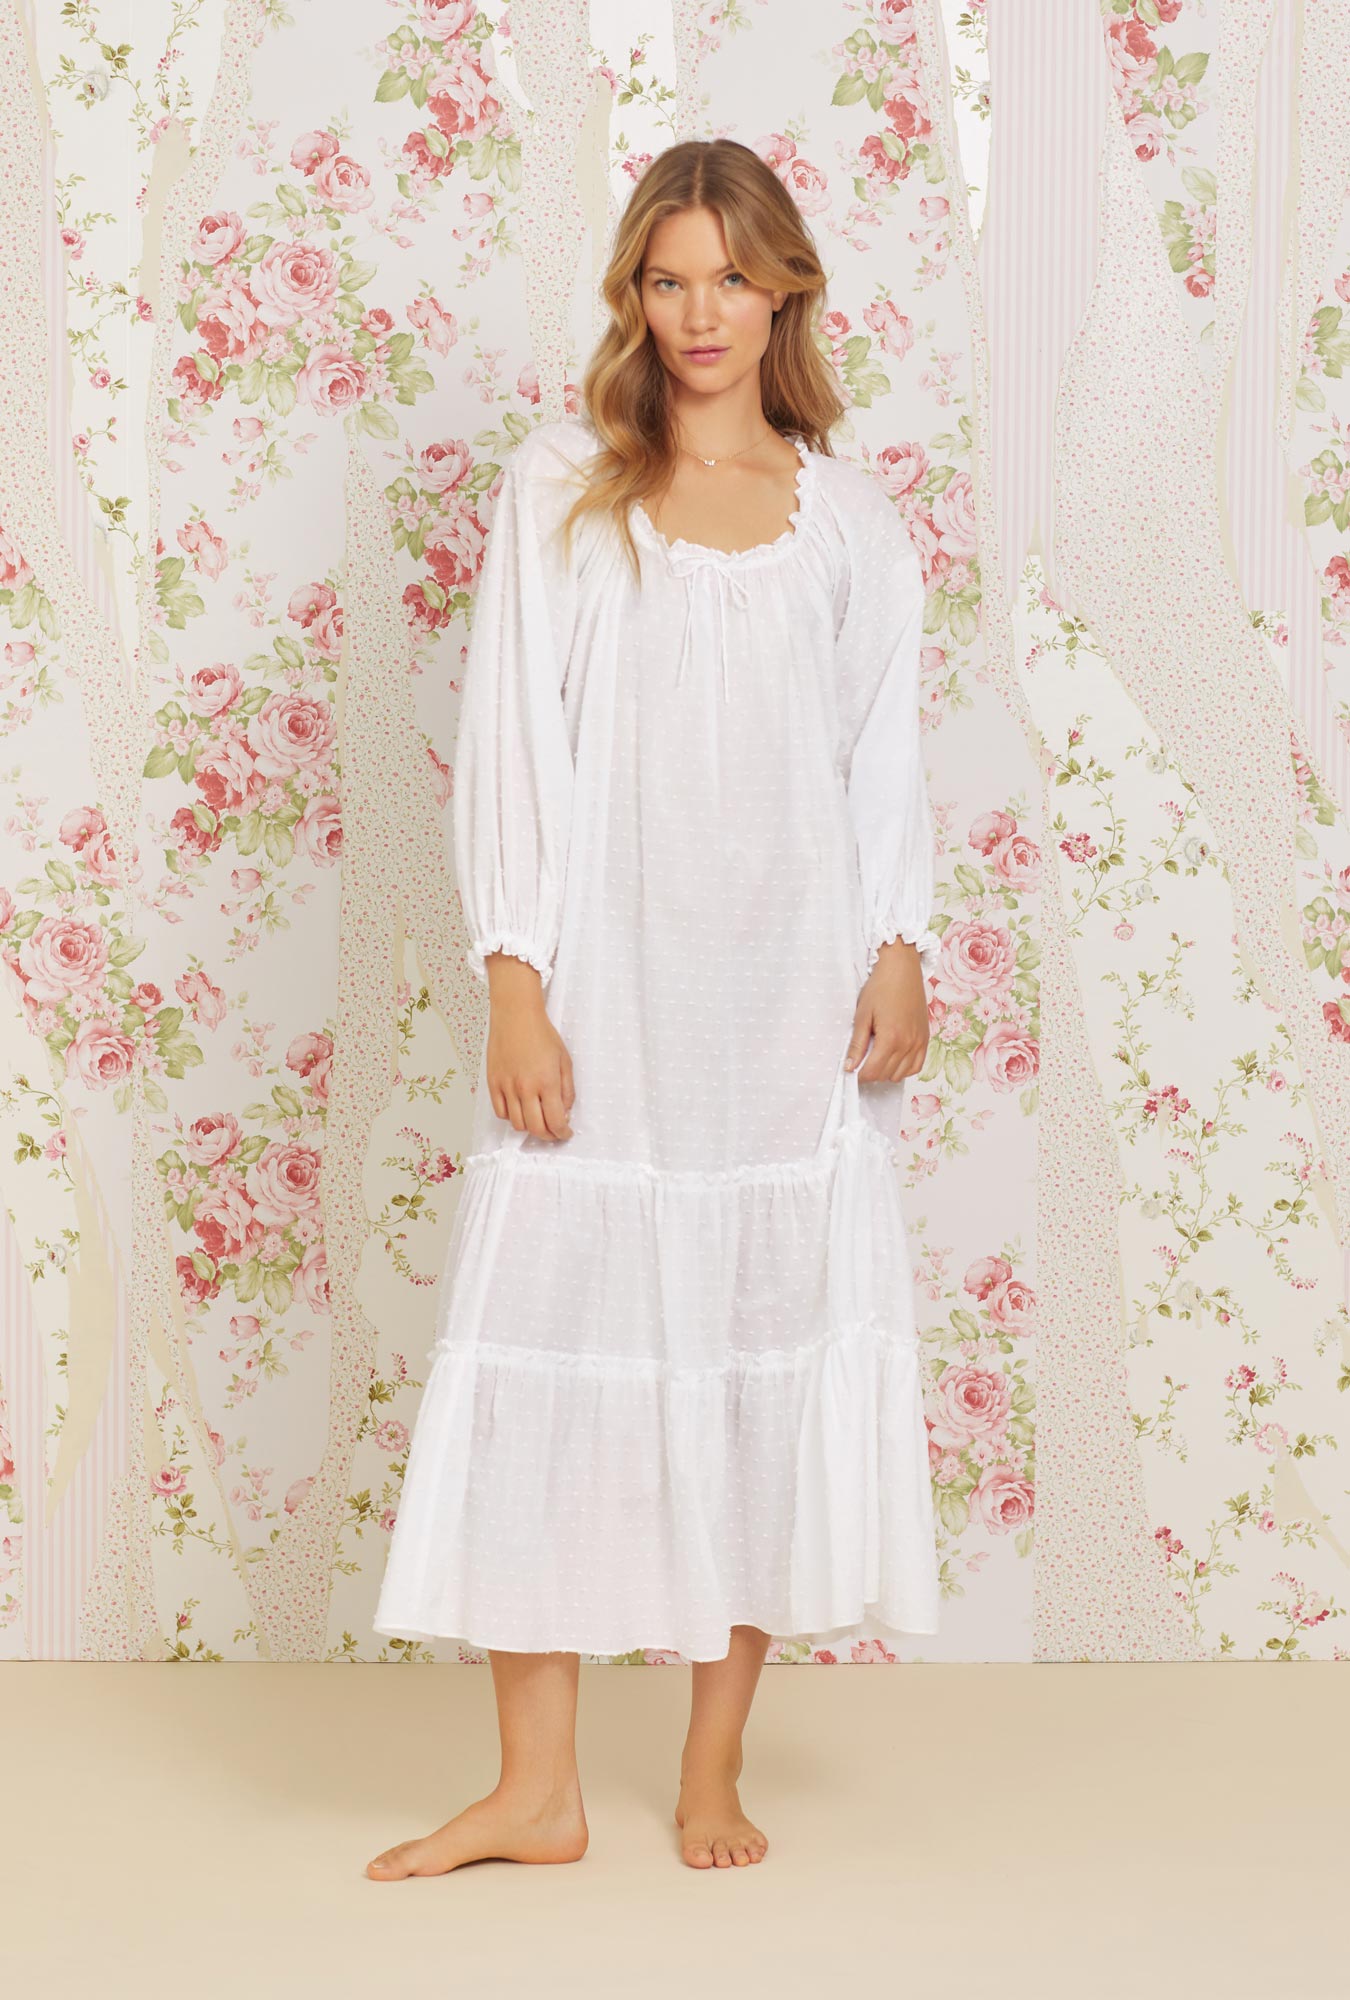 White Cotton Nightgowns - The 5 Best Brands In The World